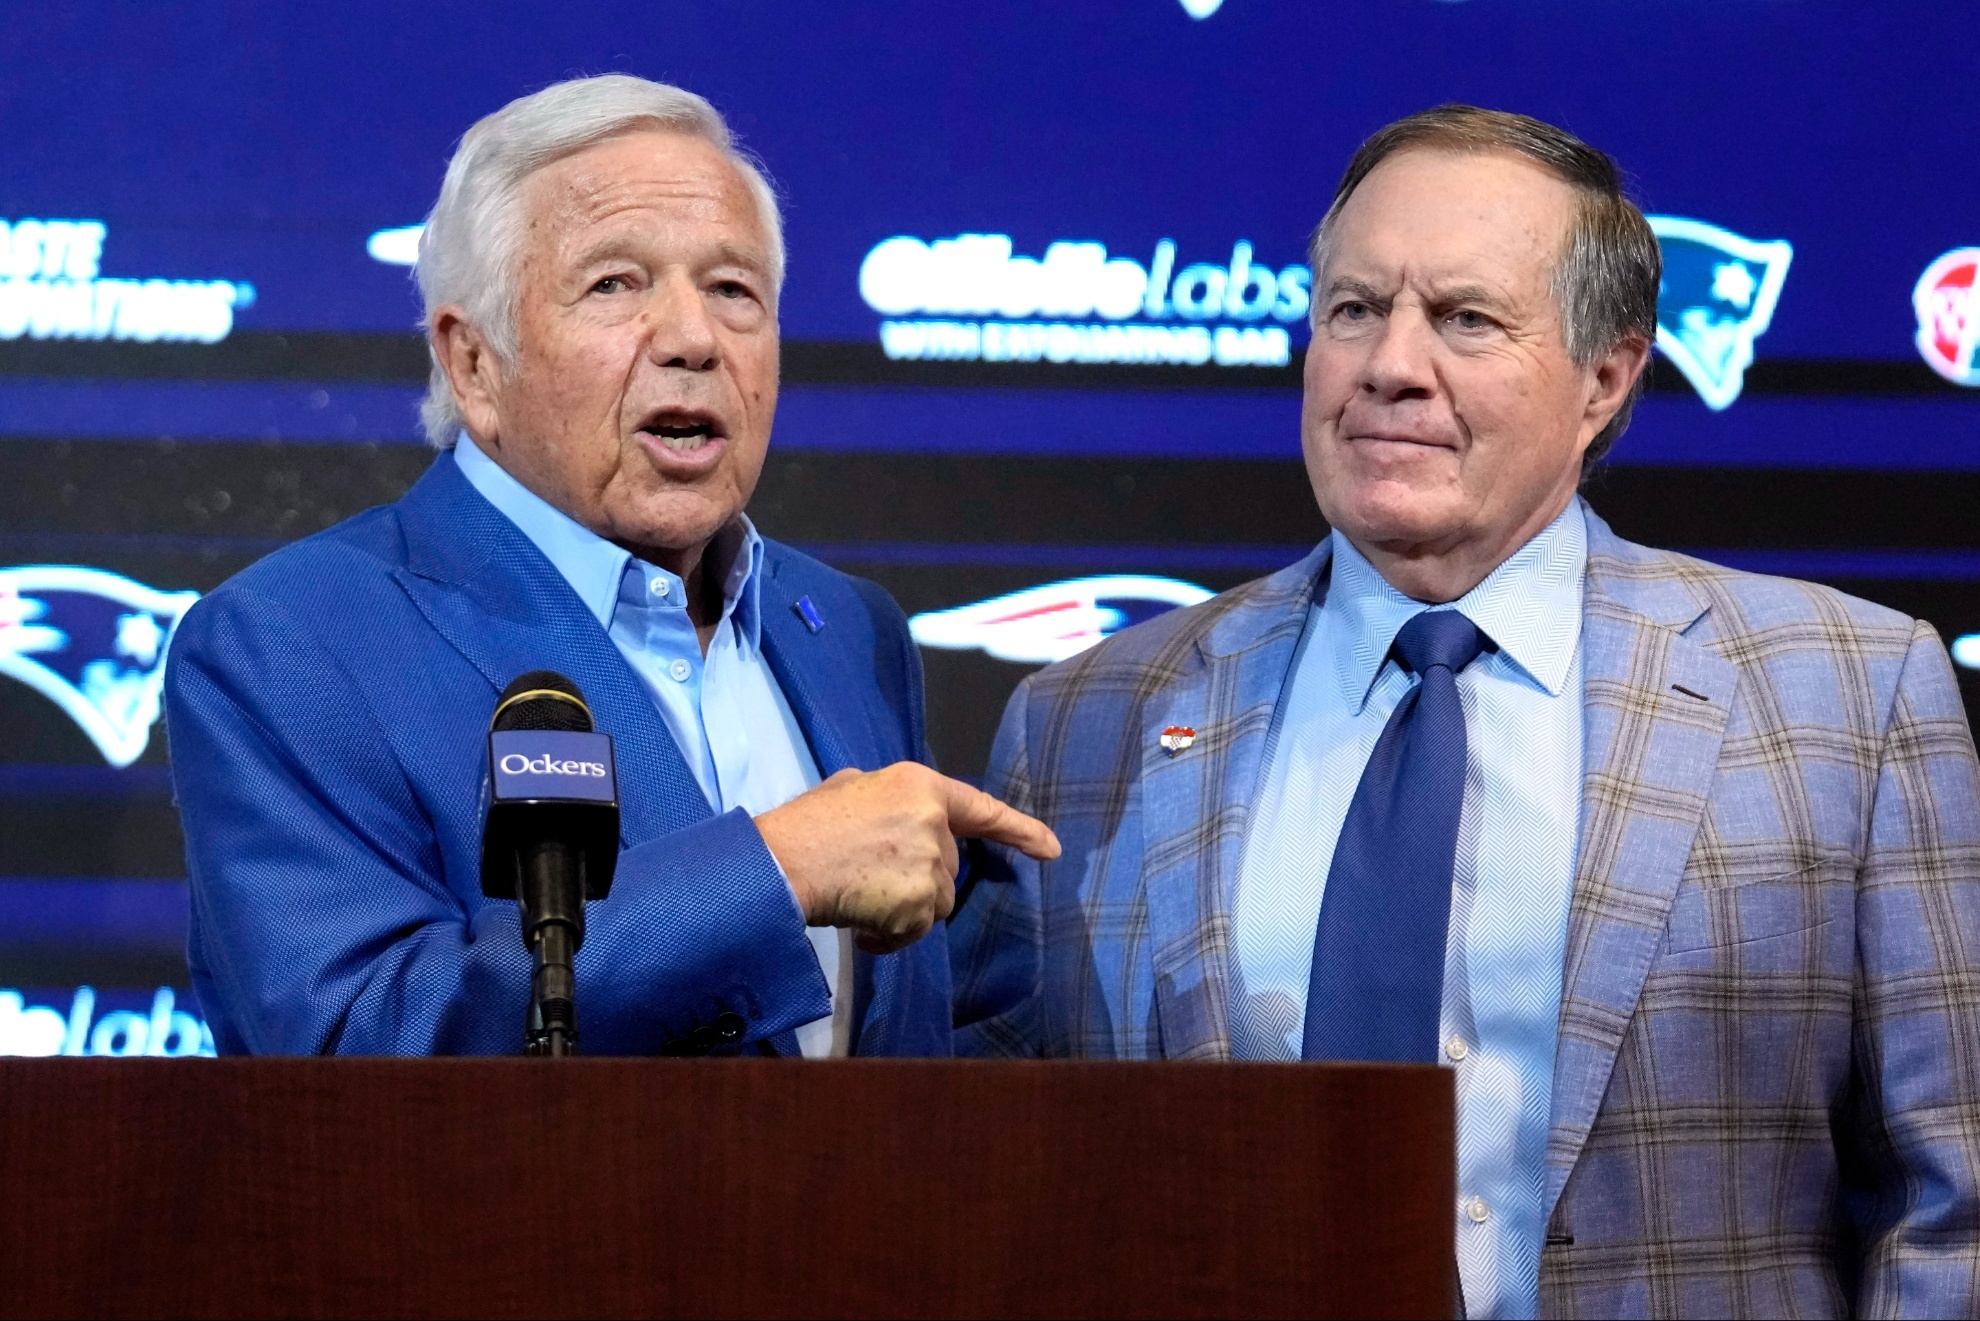 Robert Kraft and Bill Belichick worked together for 24 years at New England.